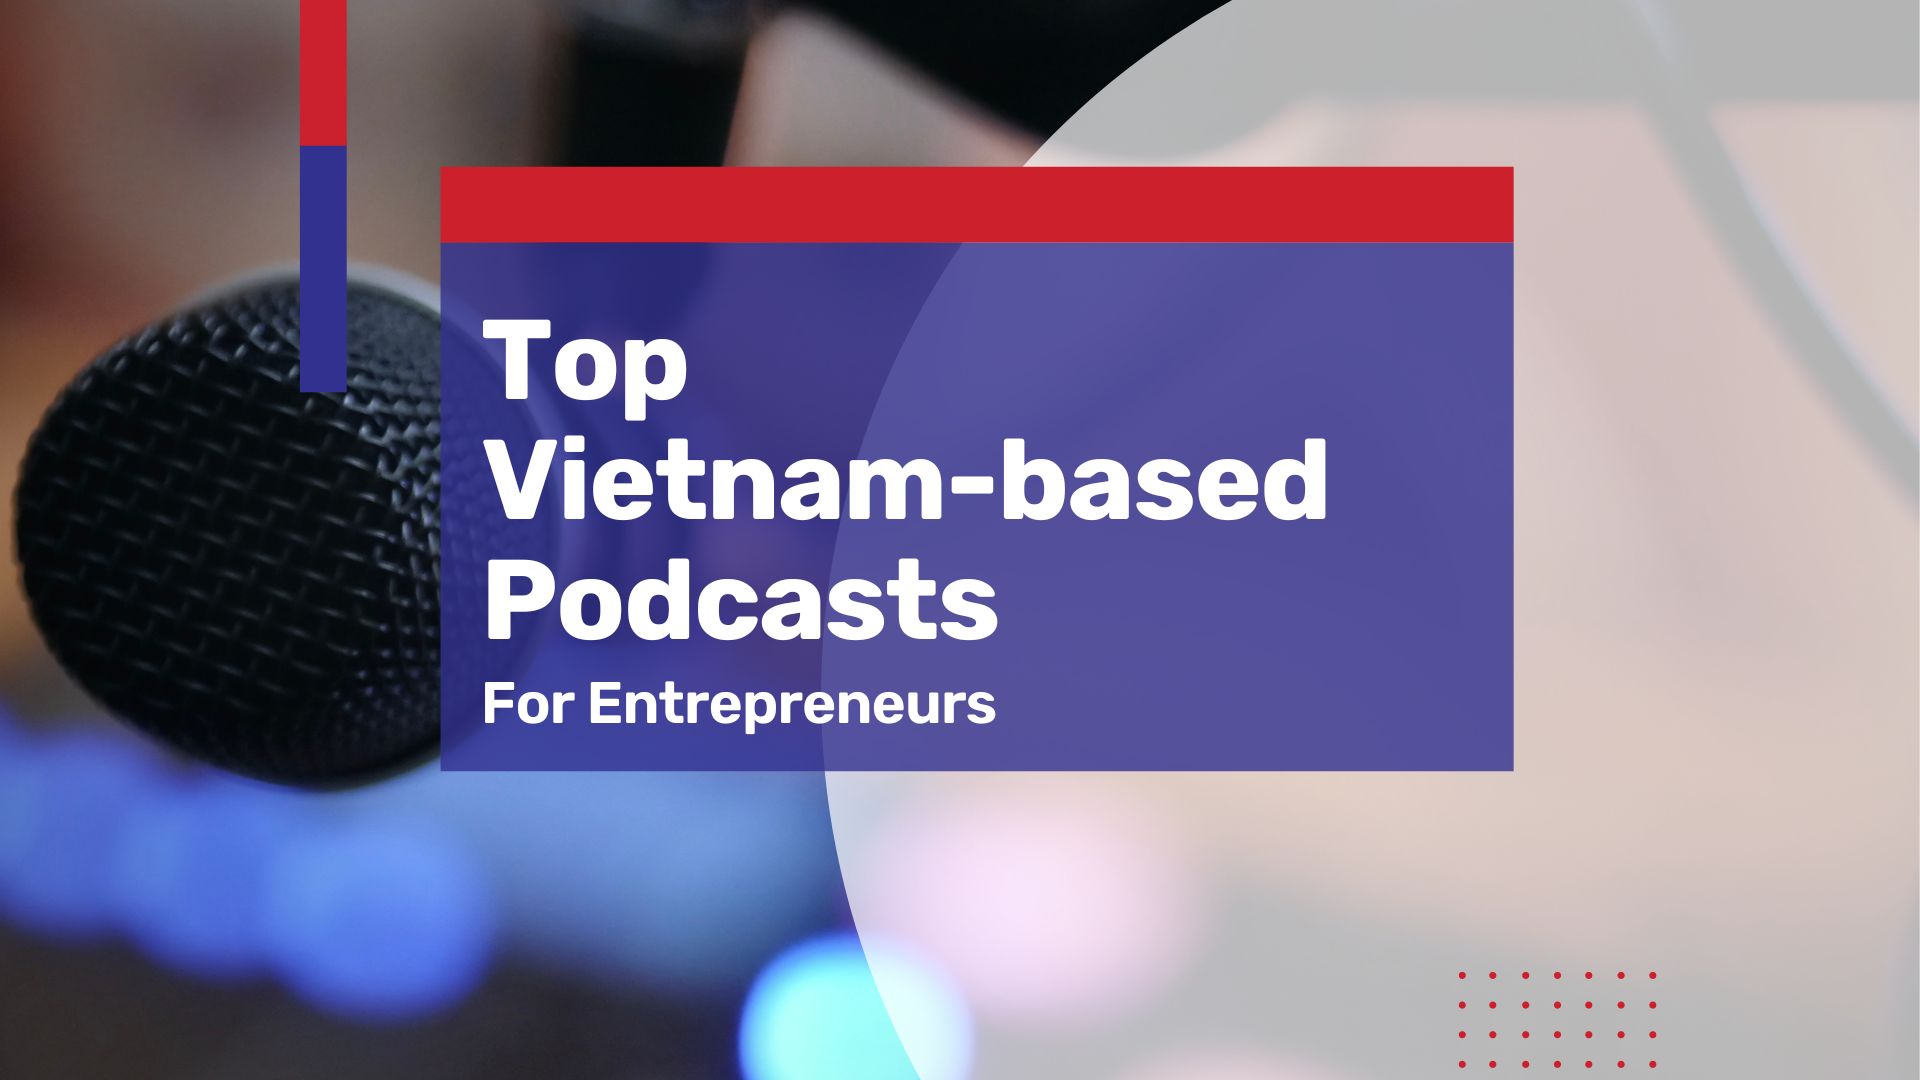 Top Business-related Podcast in Vietnam Entrepreneurs Should Listen to